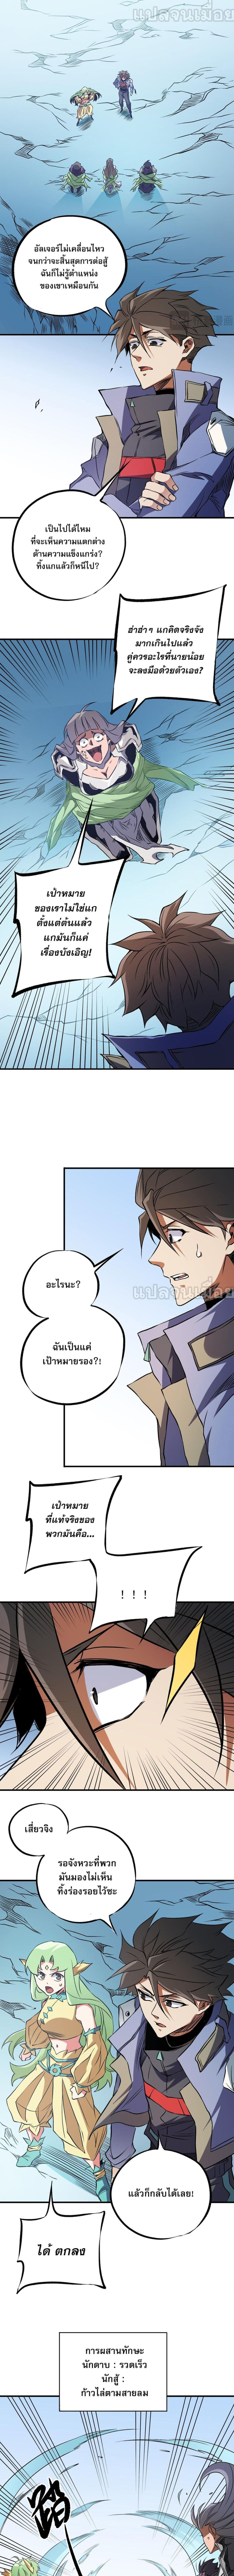 Job Changing for the Entire Population: The Jobless Me Will Terminate the Gods ฉันคือผู้เล่นไร้อาชีพที่สังหารเหล่าเทพ 69-69